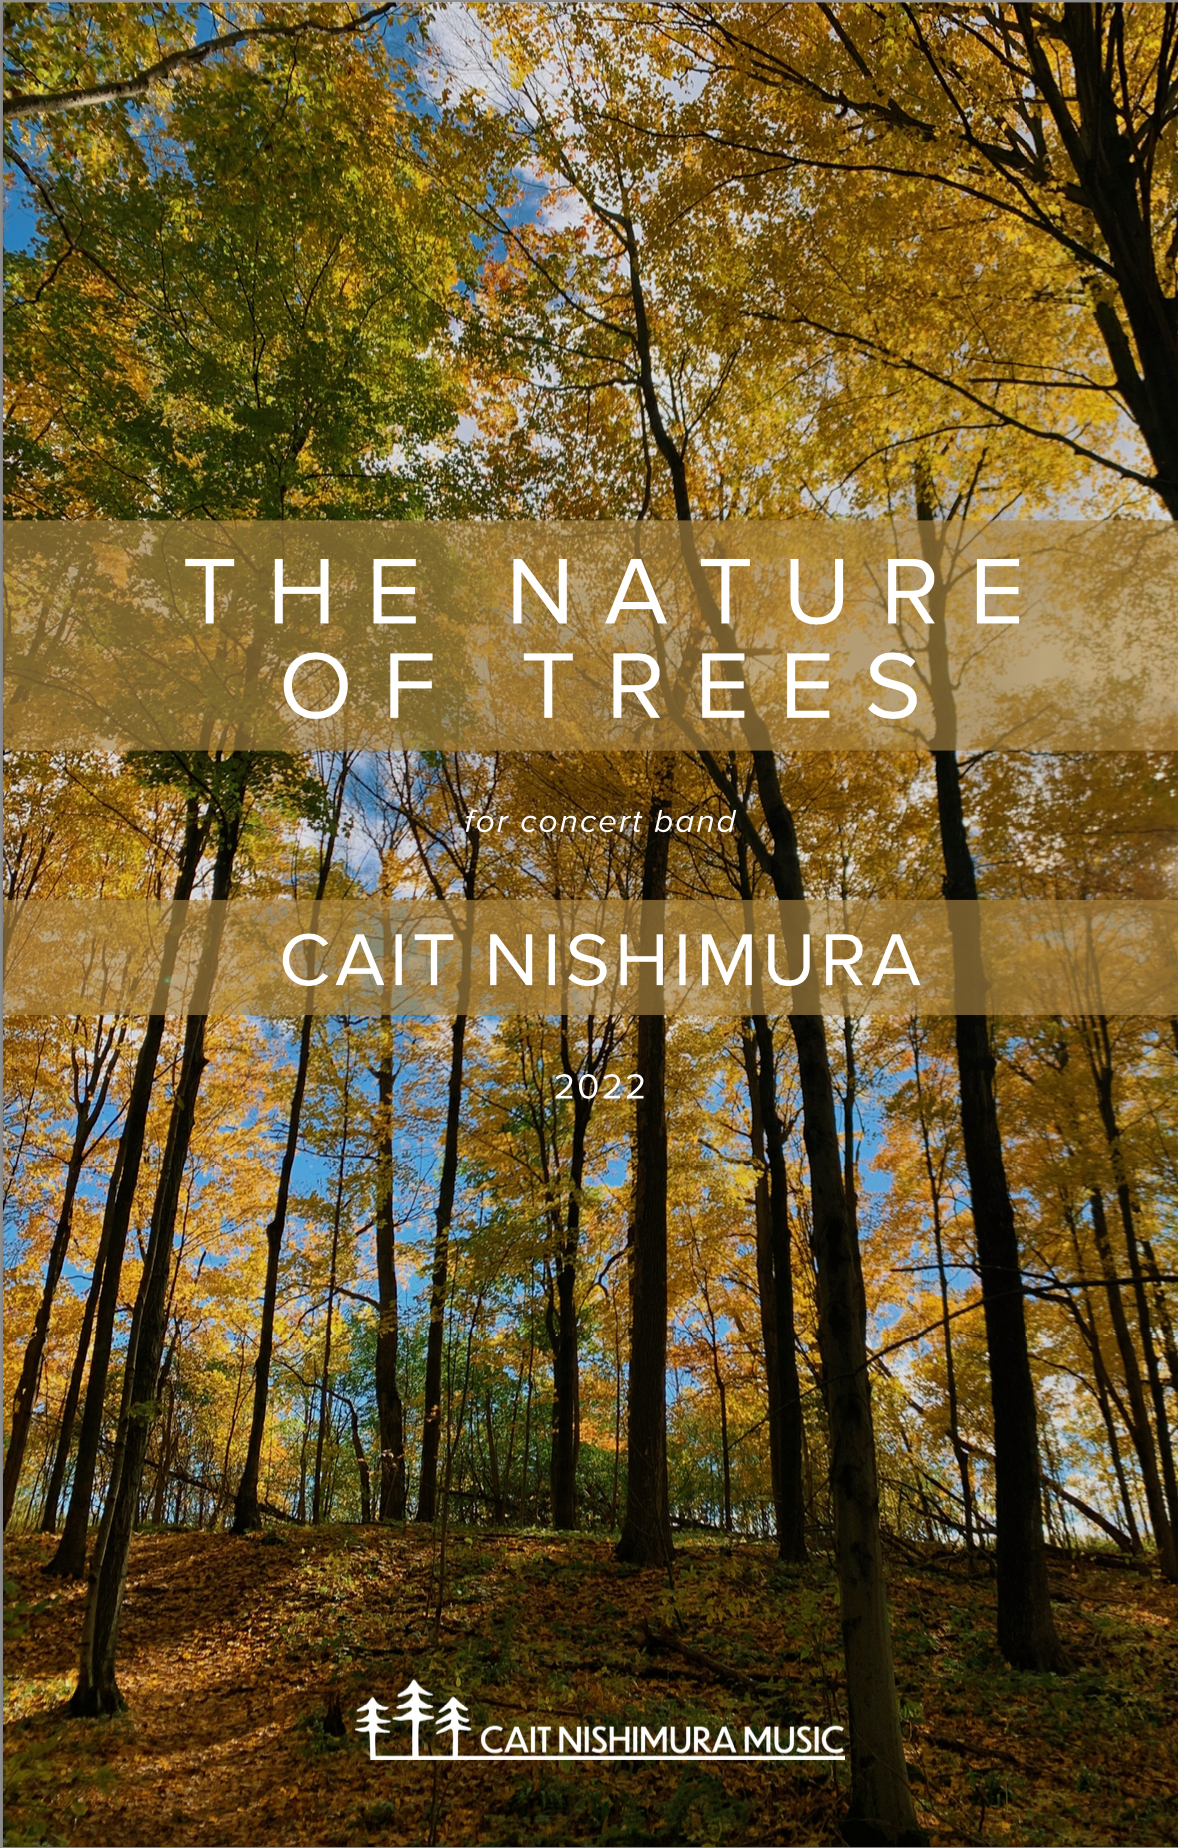 The Nature Of Trees by Cait Nishimura